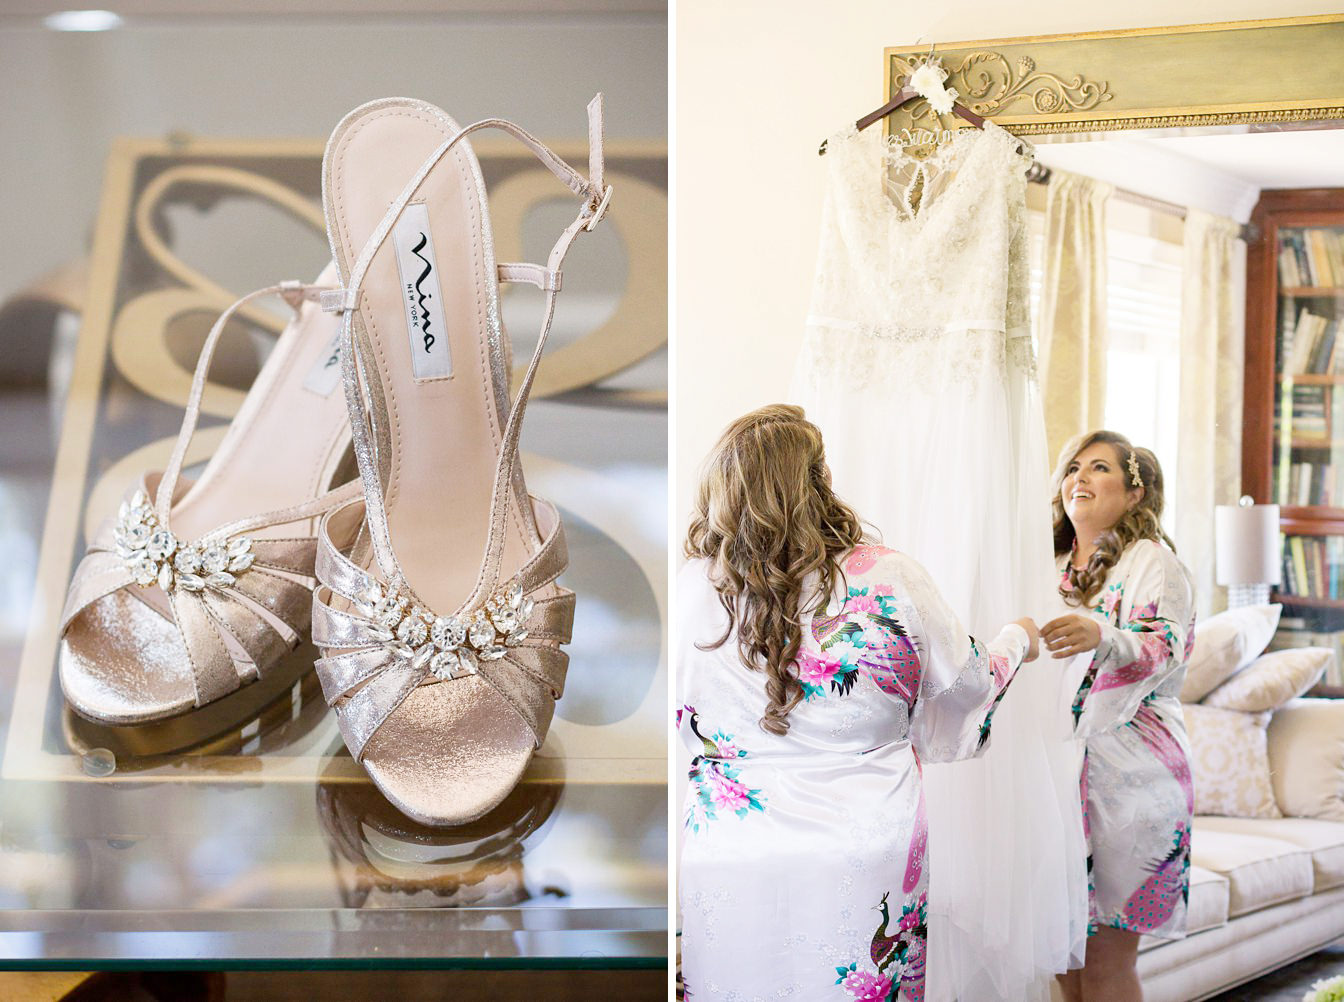 Getting Ready Photos on Their Wedding Day by Adrienne and Dani Photography